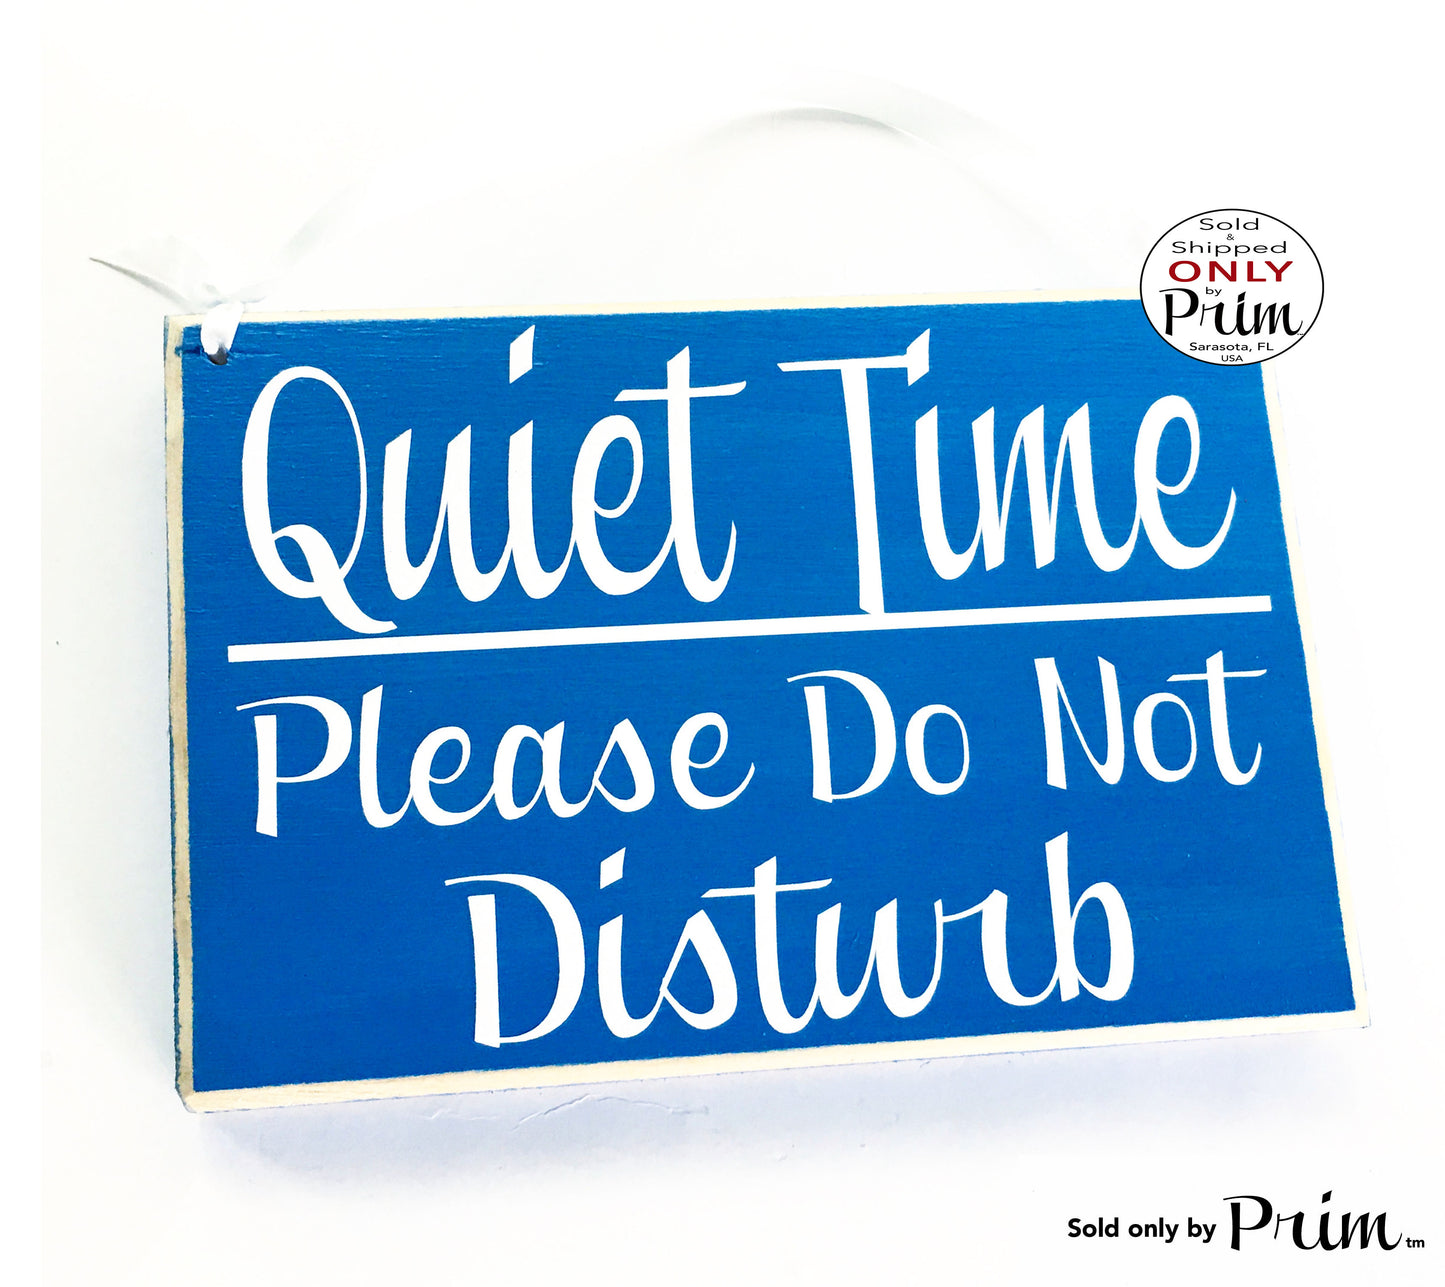 8x6 Quiet Time Please Do Not Disturb Custom Wood Sign | Silent Soft Voices In Session Progress Do Not Enter Nap Day Sleeper Door Plaque Designs by Prim